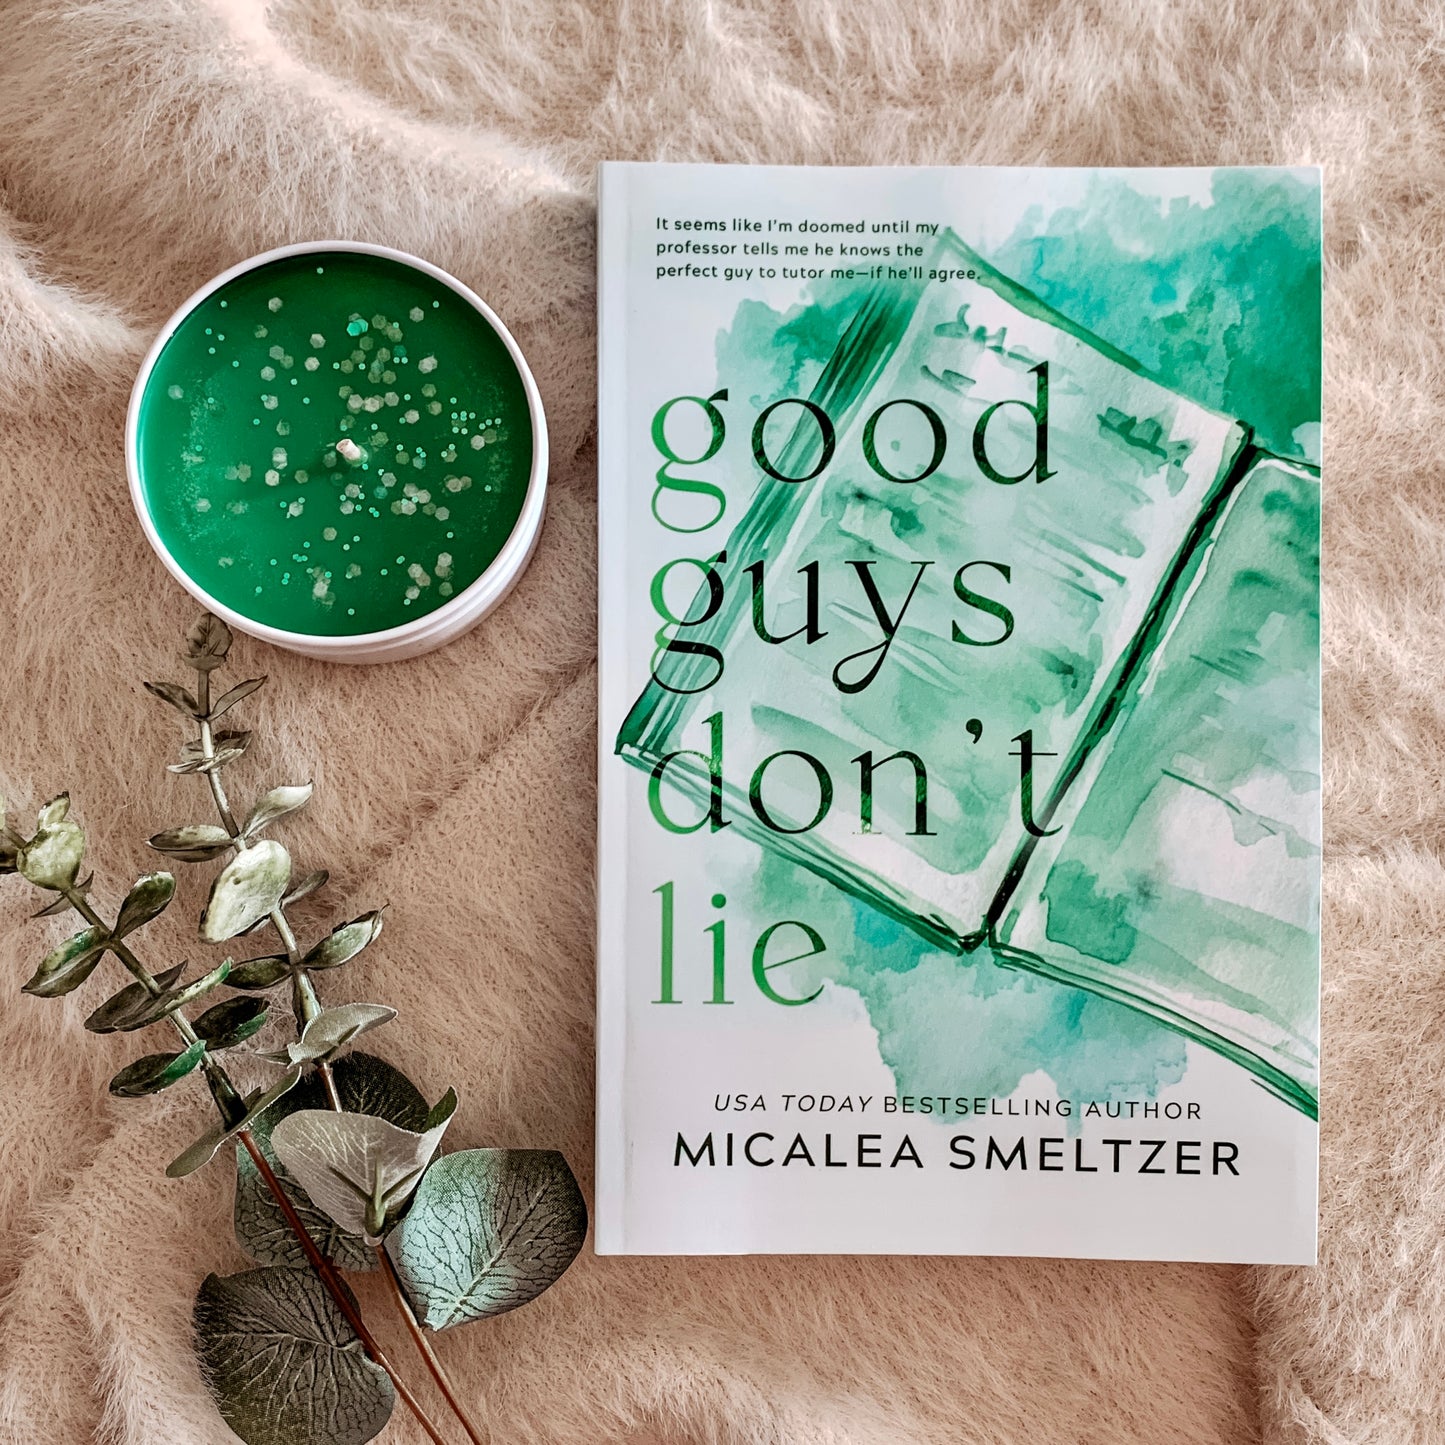 Good Guys Don't Lie (Special Edition) by Micalea Smeltzer